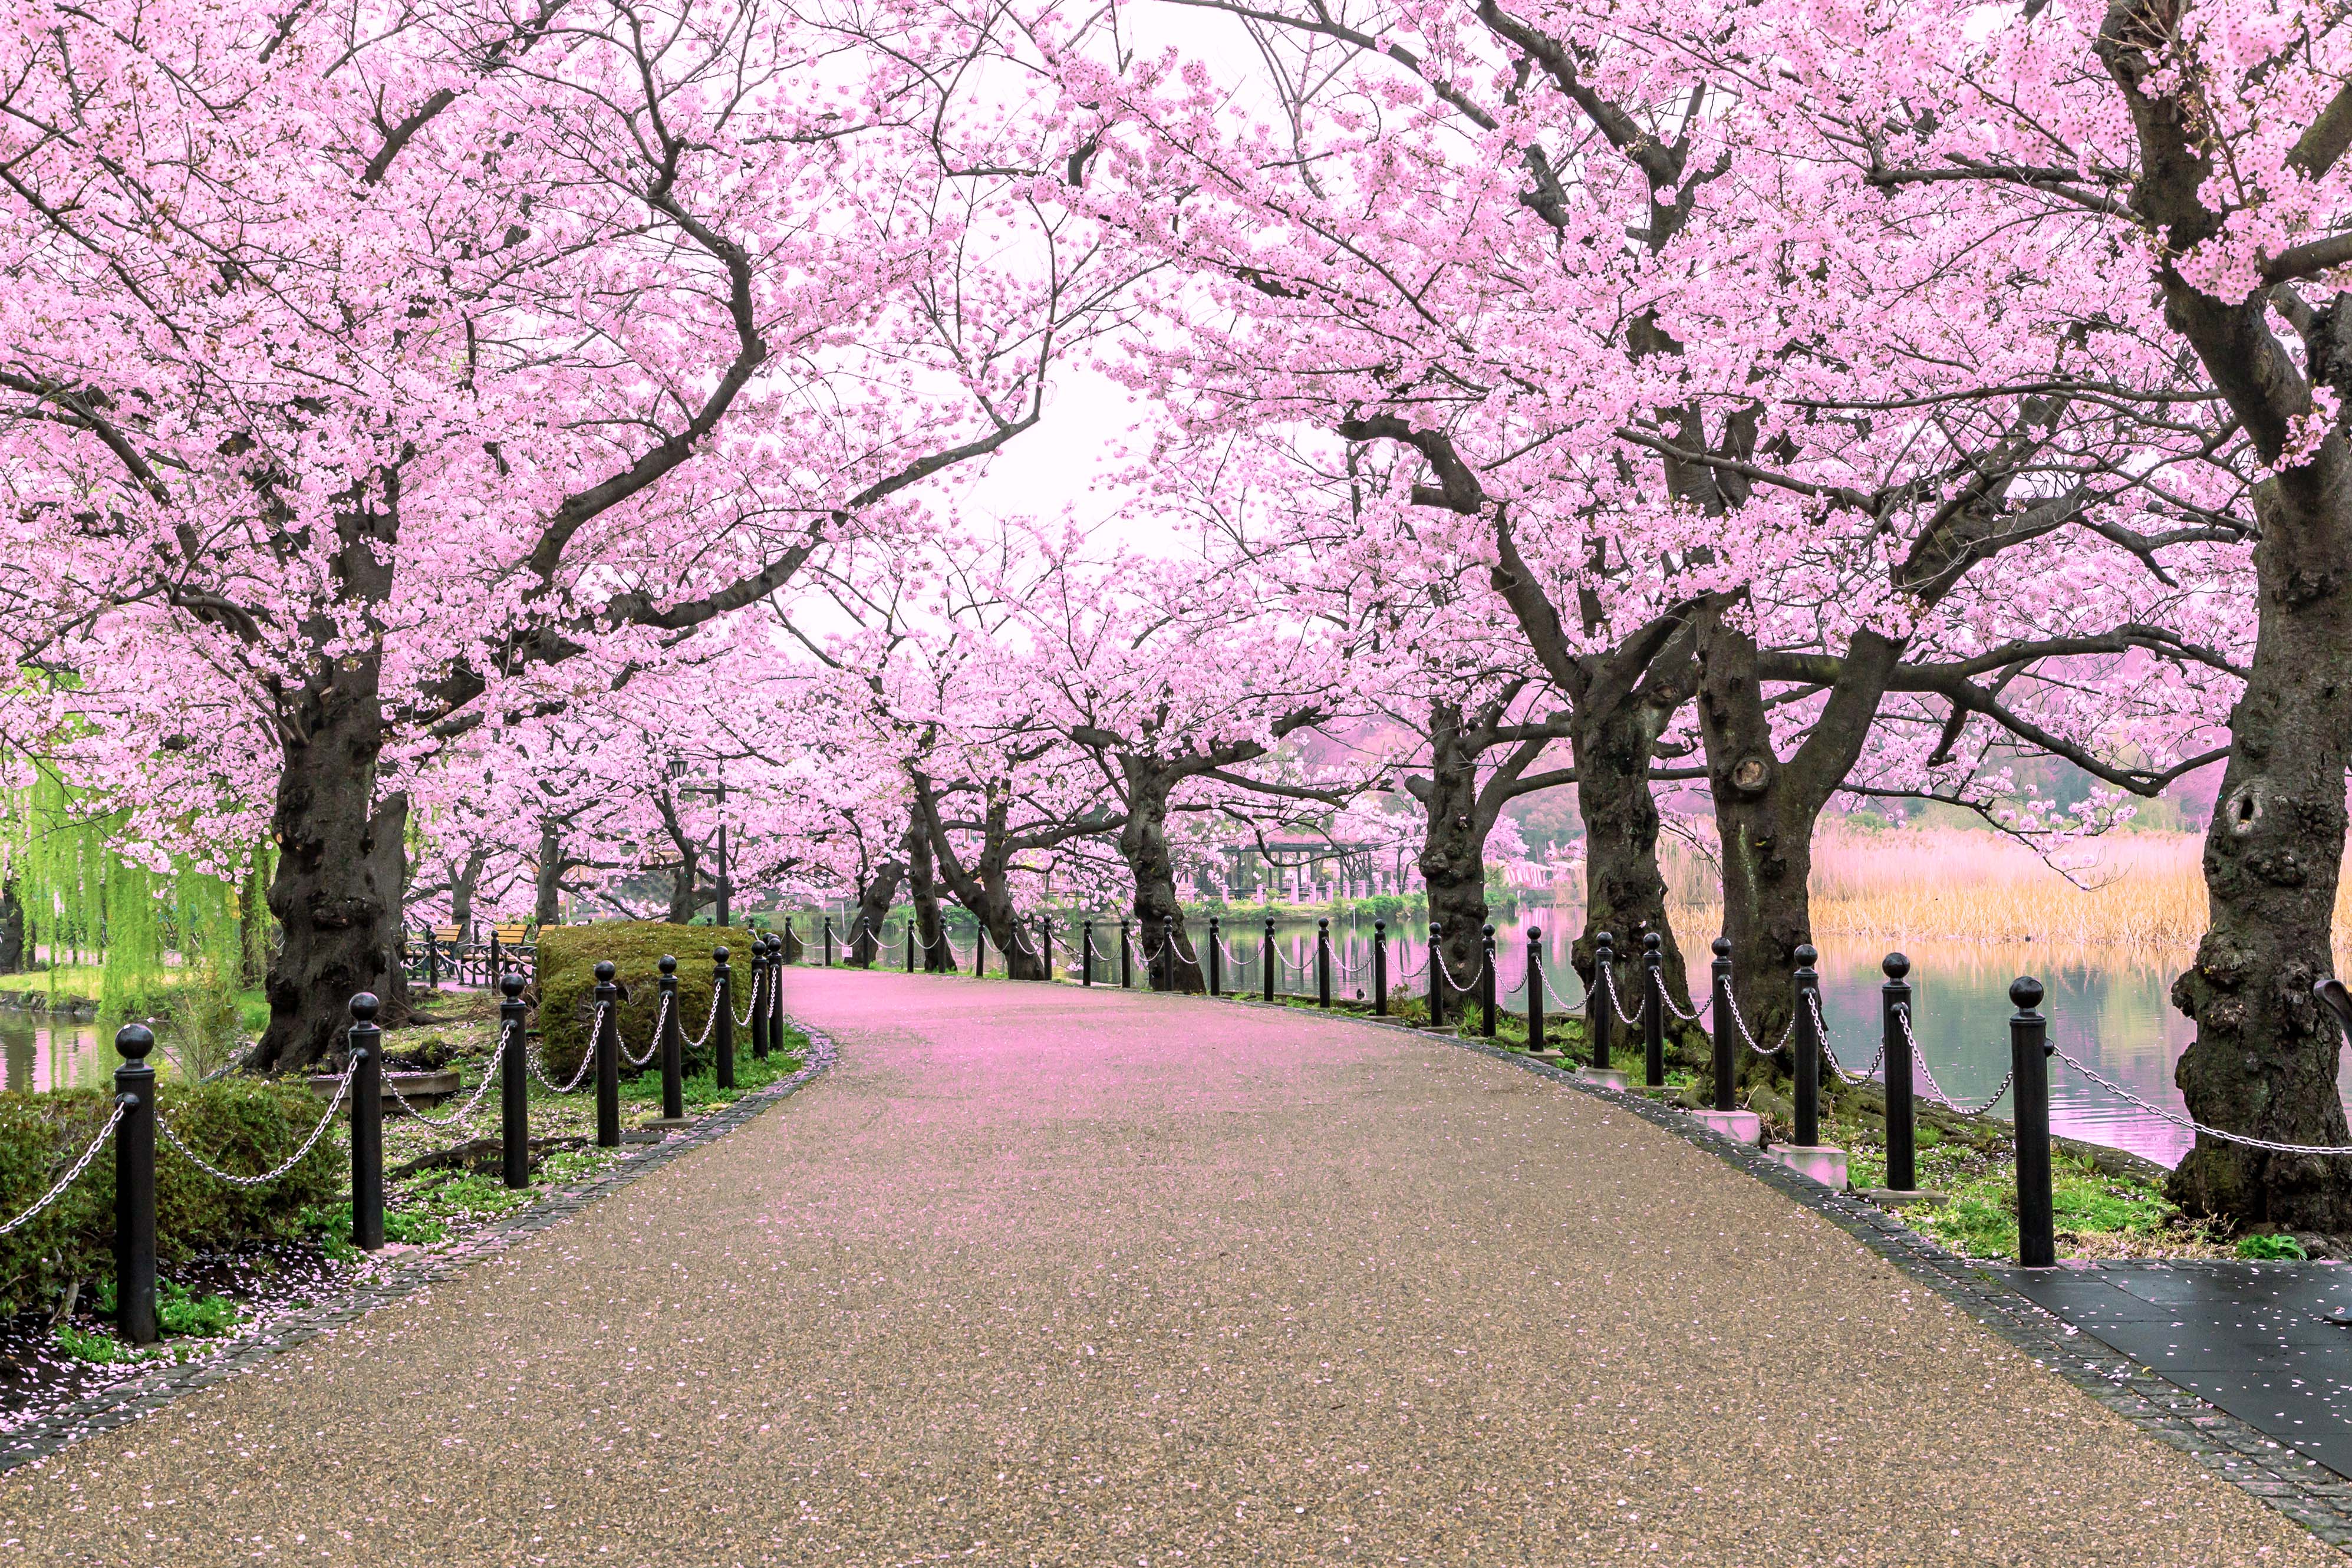 Where and when to see cherry blossom trees